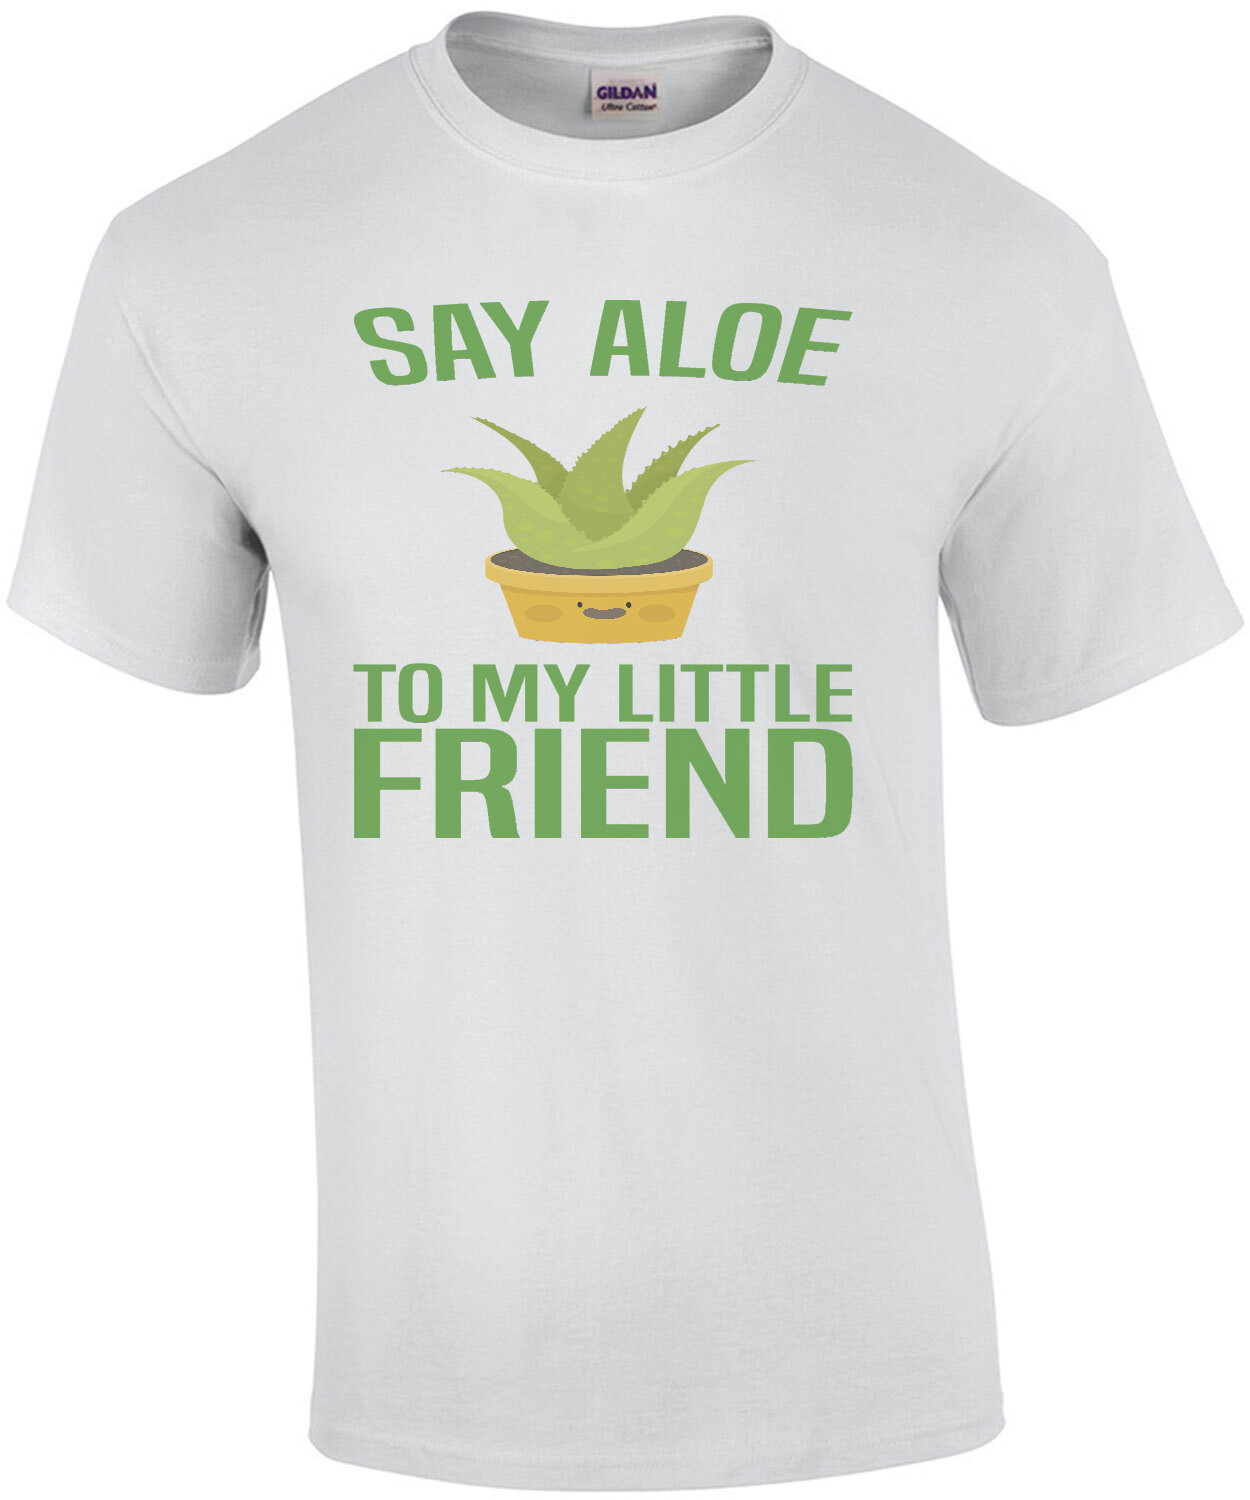 Say Aloe to my little friend - funny pun t-shirt